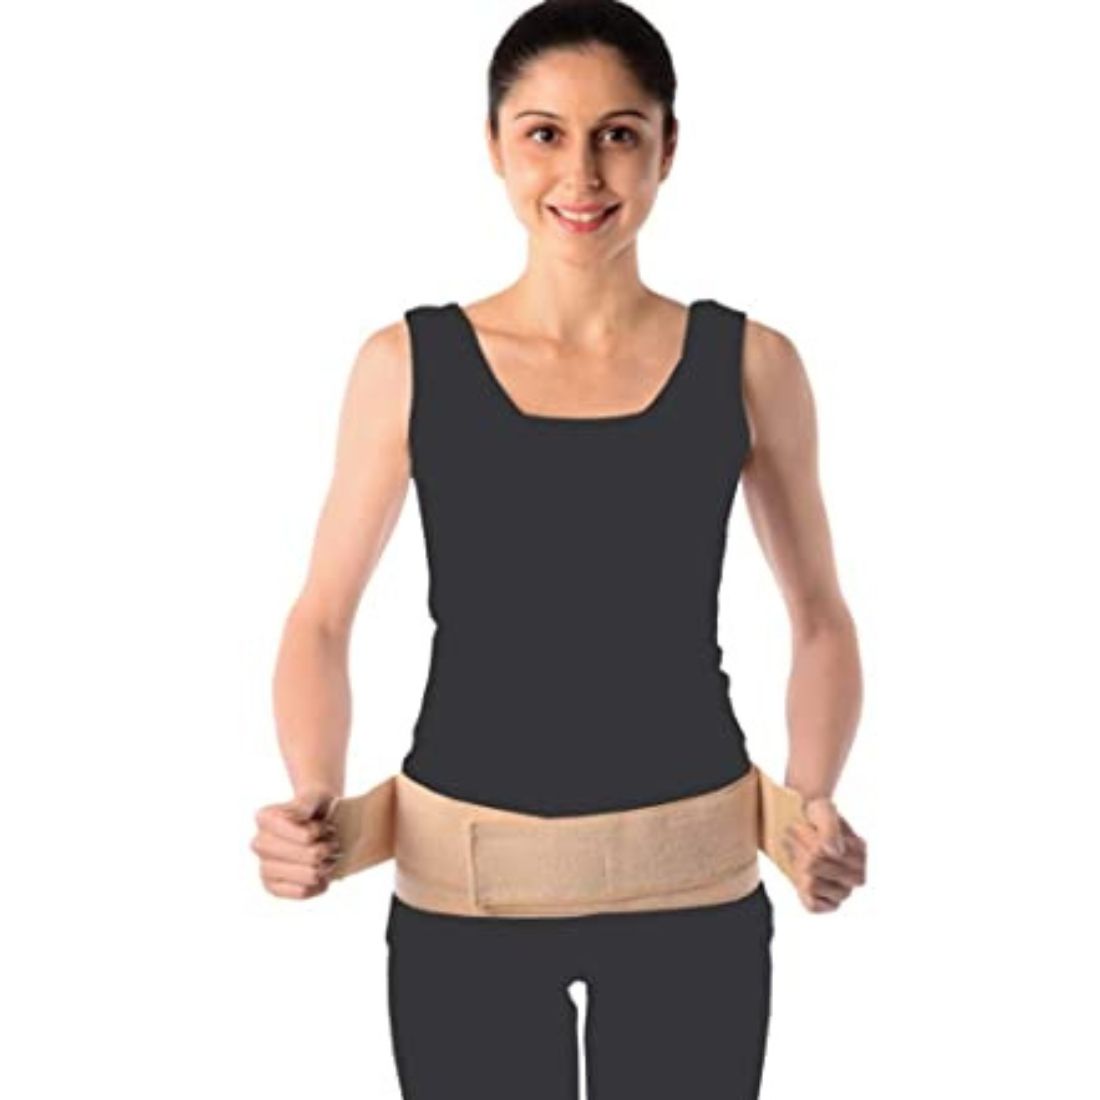 Vissco Abdominal Maternity Binder or belt is recommended in cases of pregnancy to help with proper posture 